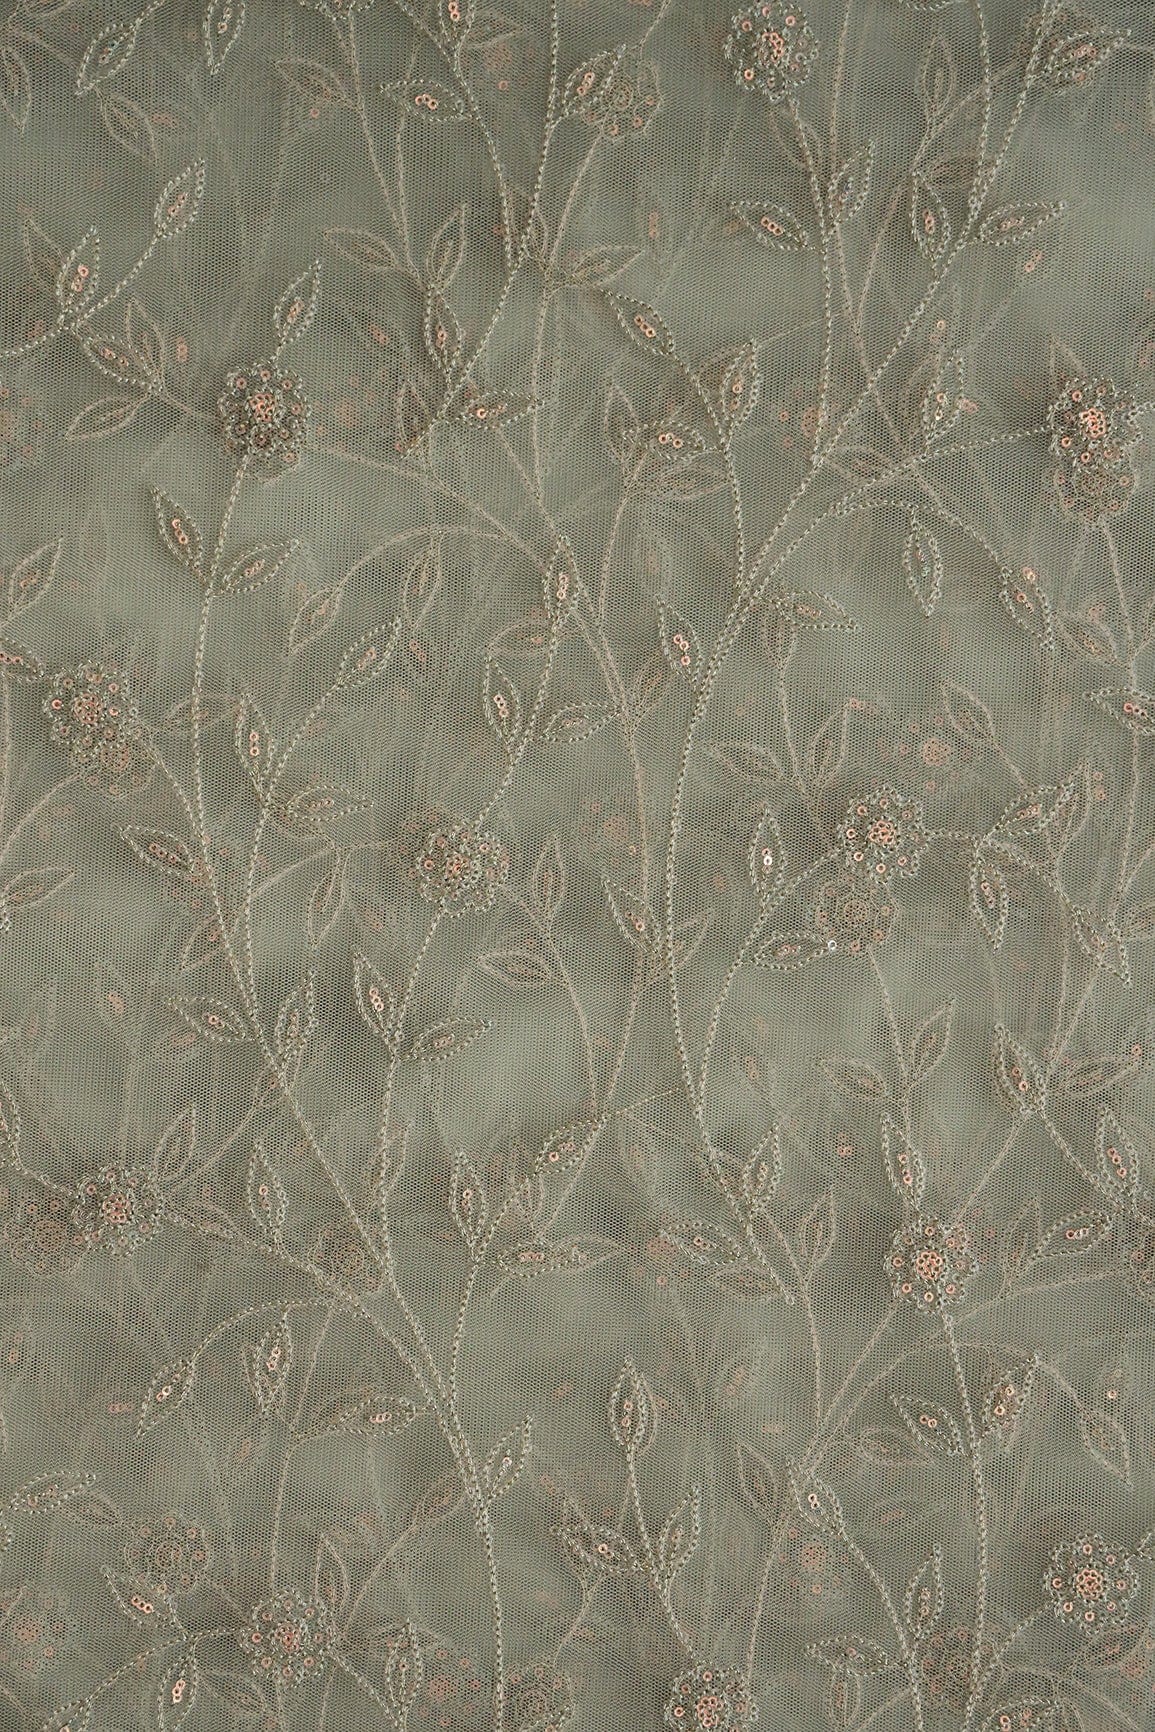 doeraa Embroidery Fabrics Olive Thread With Sequins Beautiful Leafy Floral Embroidery On Olive Soft Net Fabric